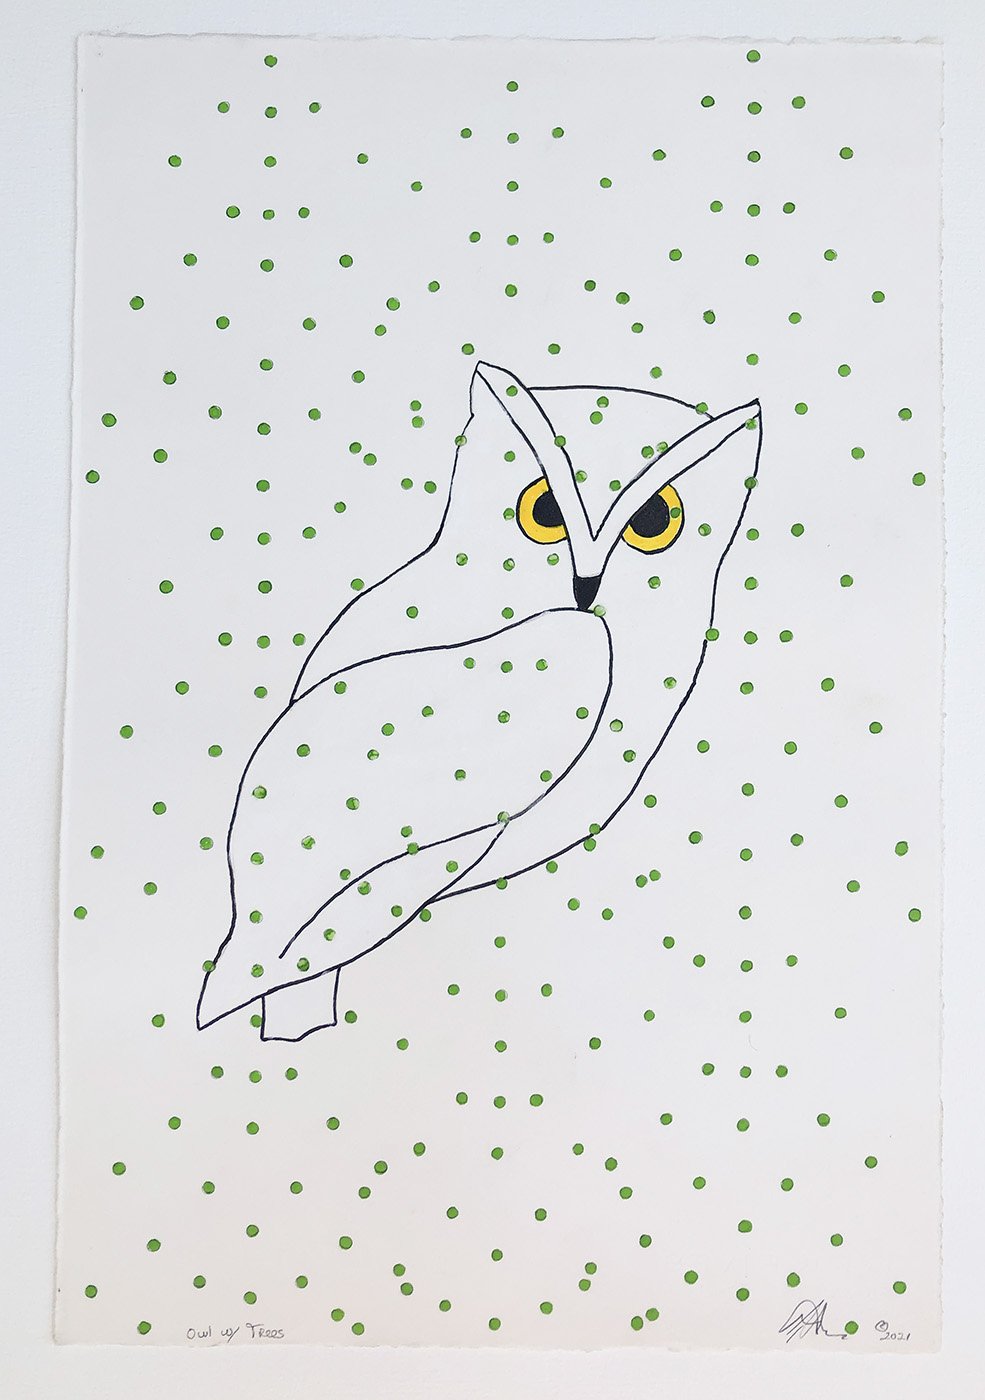 "Owl with Trees," 2021, Gouache, sumi ink, pencil on Arches paper, 22.5" x 15".